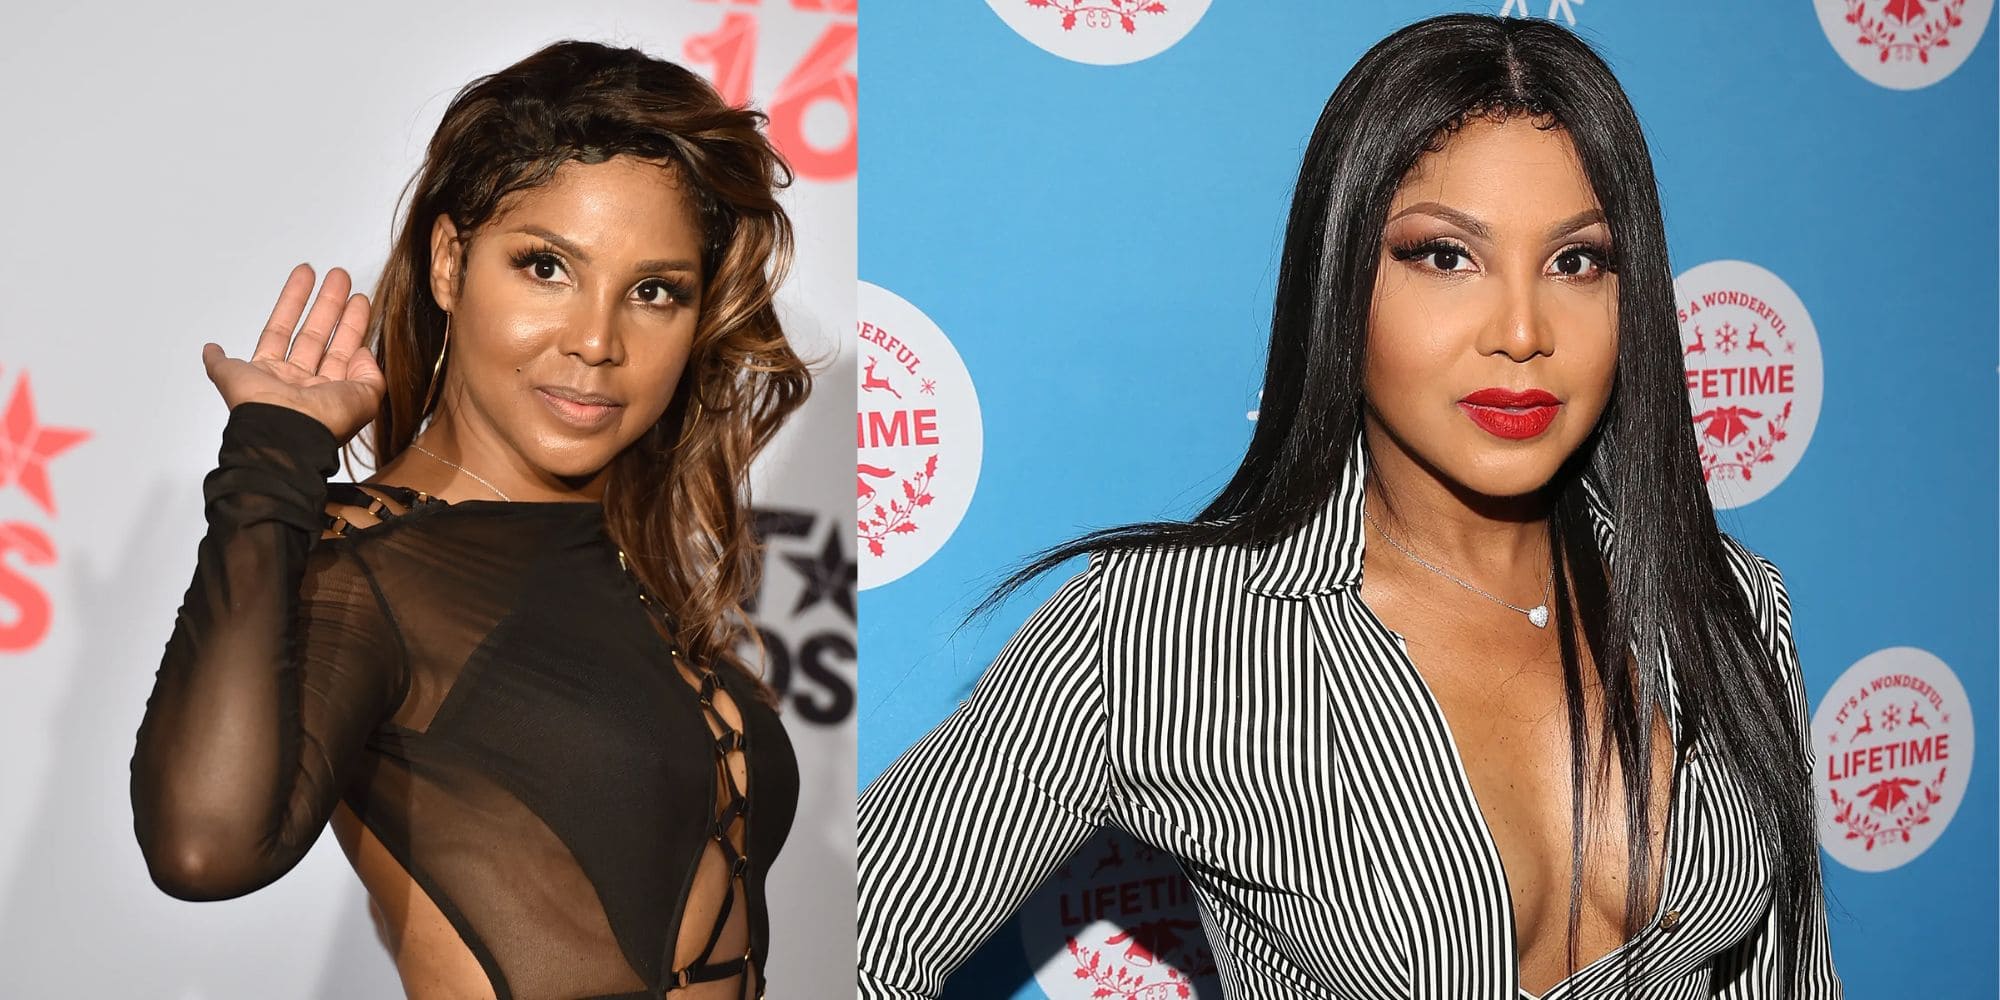 Who is Toni Braxton Dating Now? Did She Break Up with Toni Braxton?